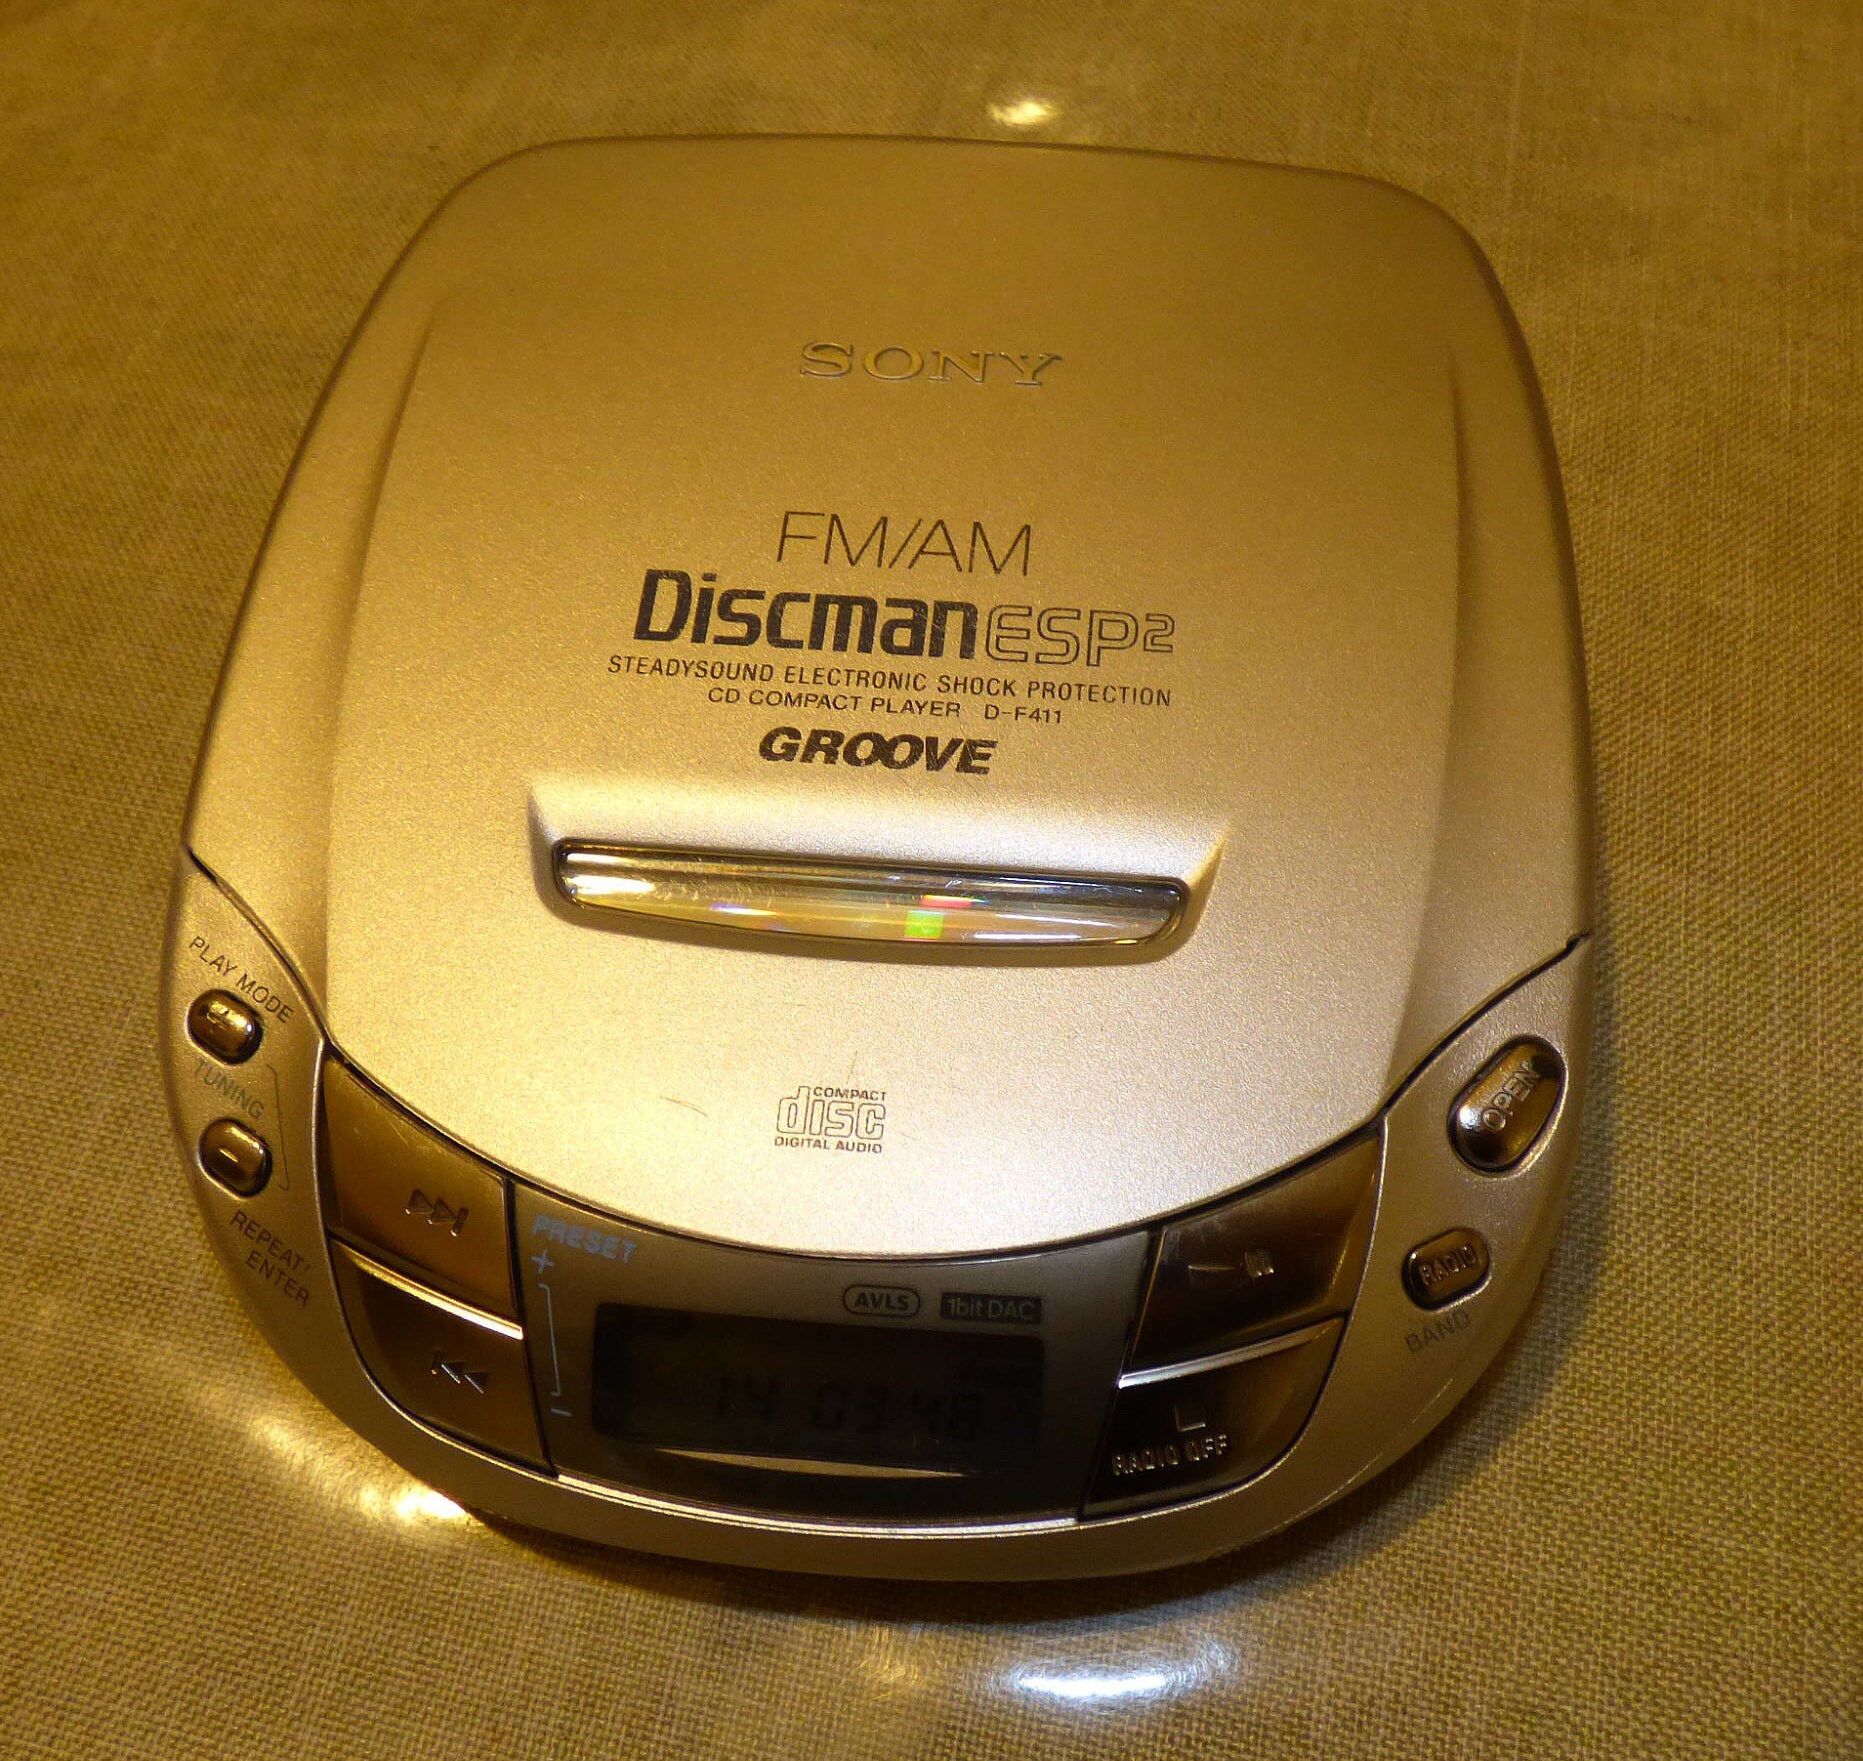 Sony DF411 Discman Portable CD Player with AM/FM Tuner